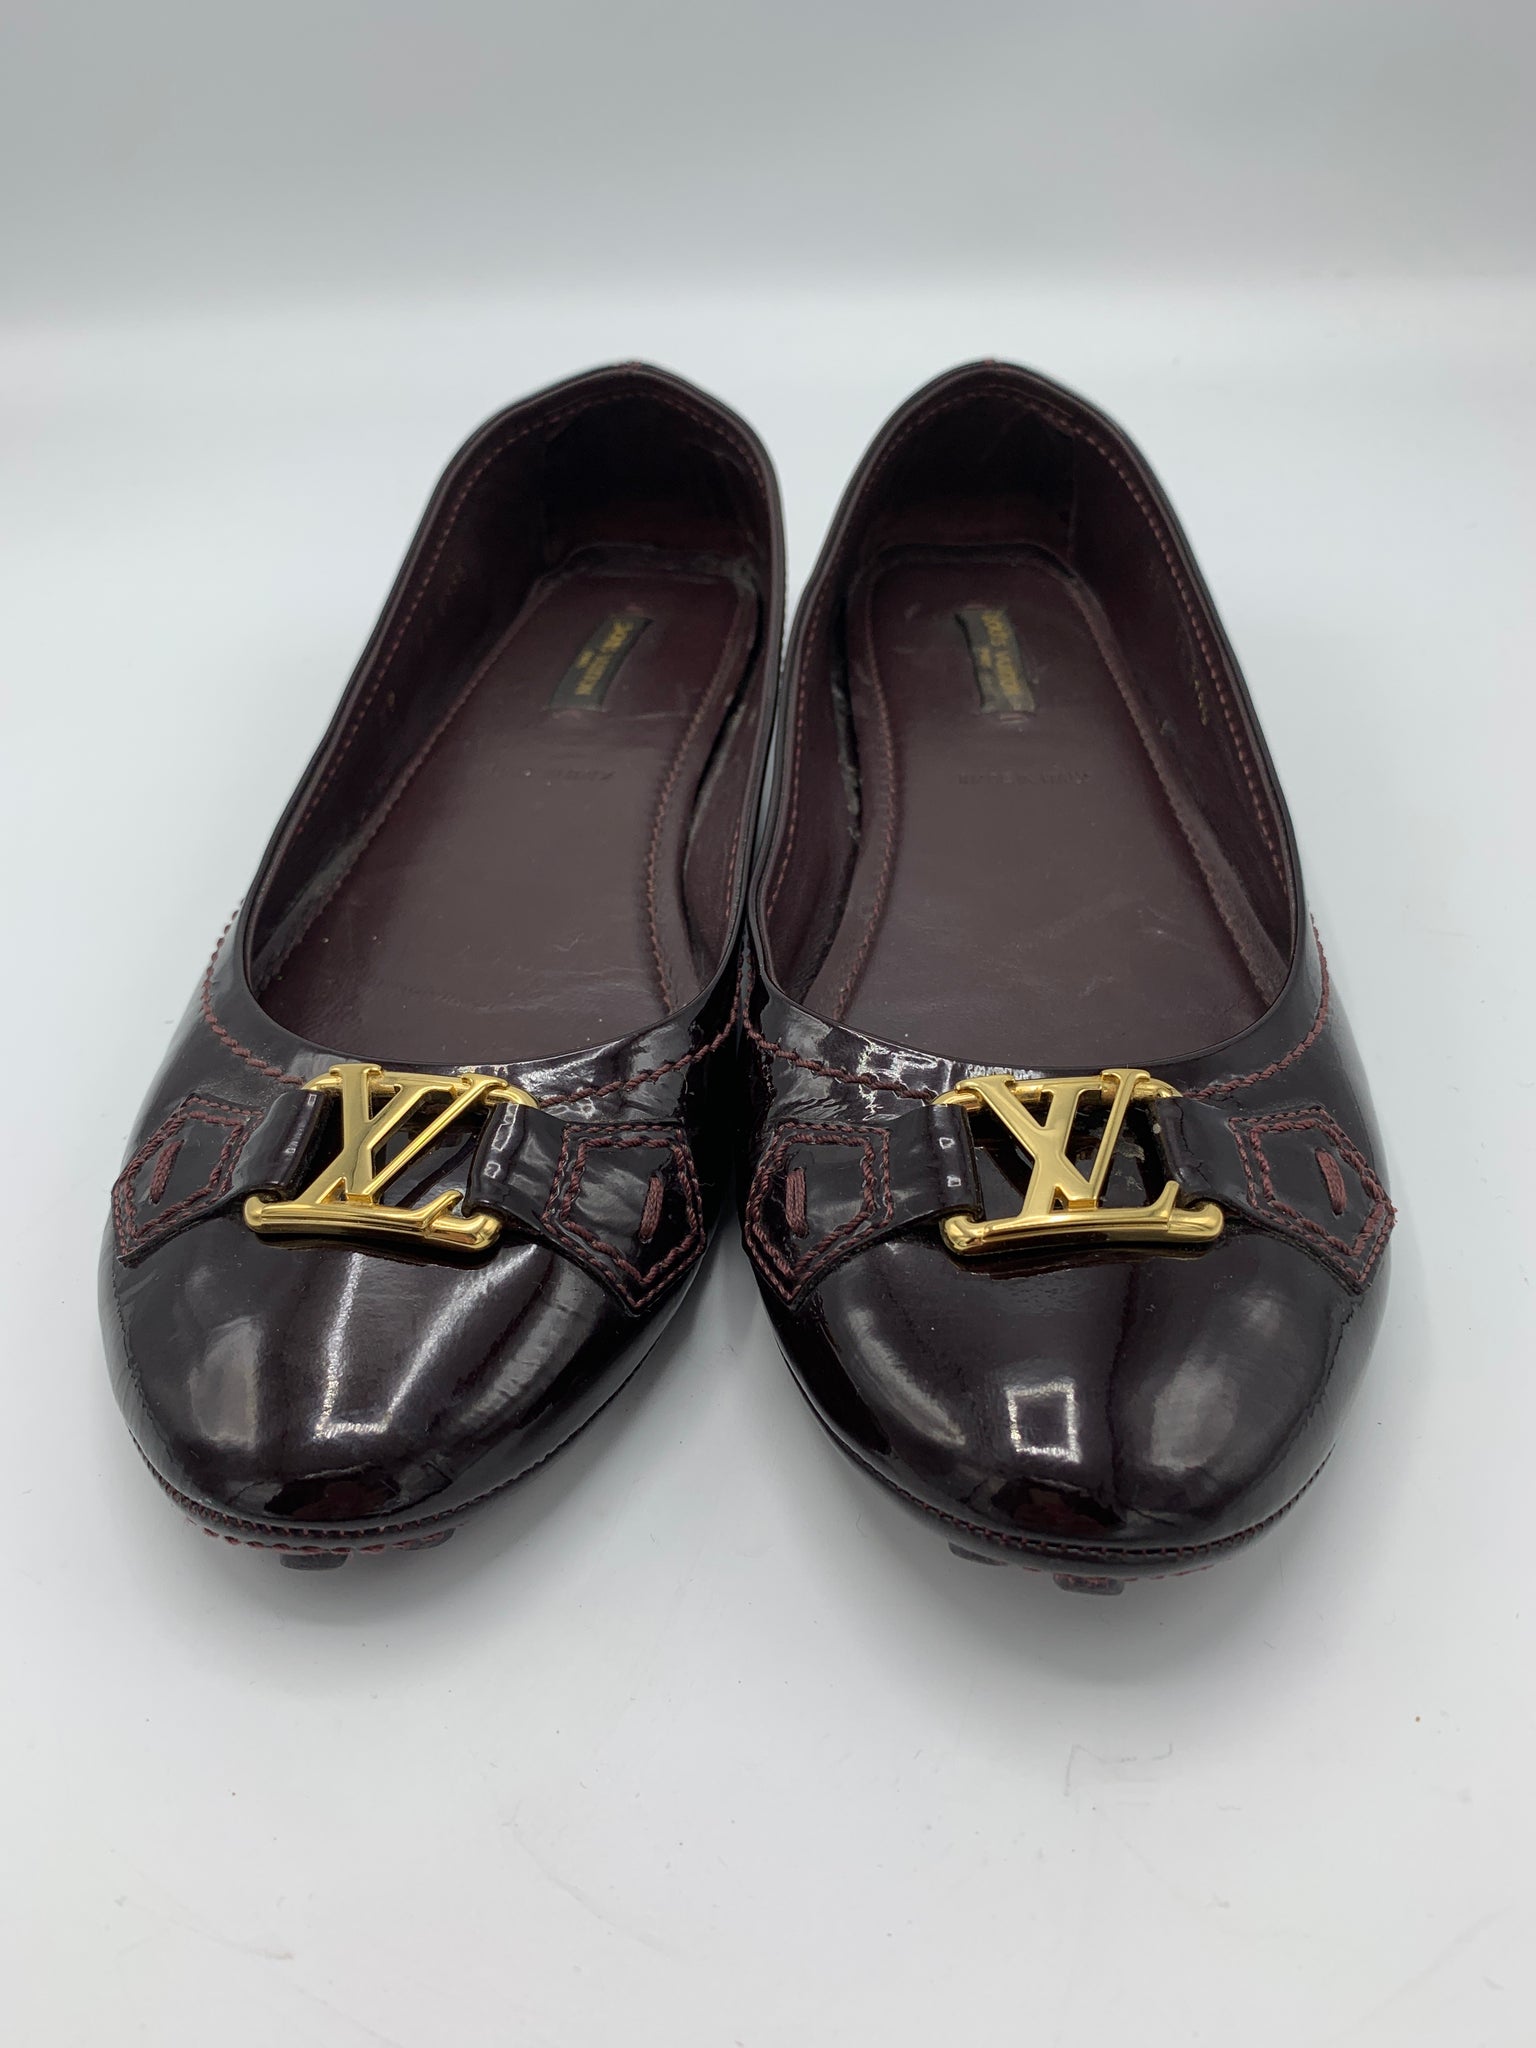 Louis Vuitton Women's Flats and Oxfords for sale